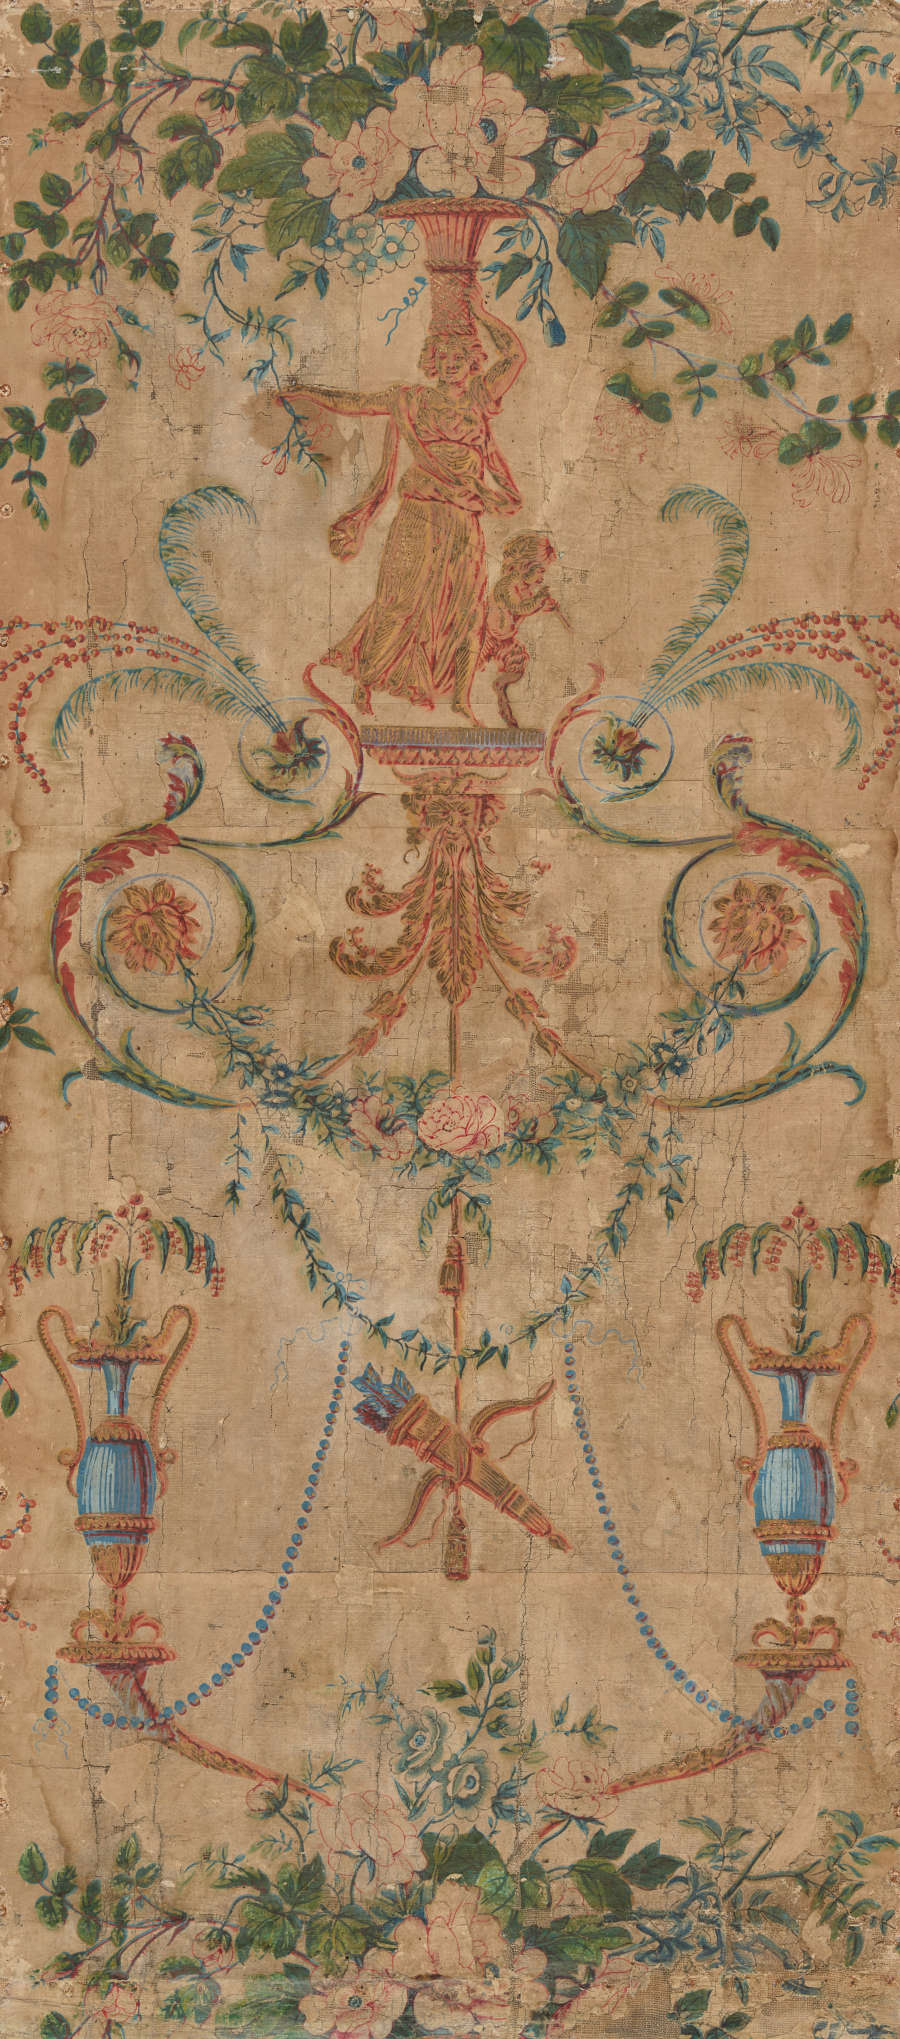 Tall panel of aged wallpaper depicting a central urn motif, surrounded by symmetrical foliage and floral designs, alongside drapery in soft colors. Pattern is set on an yellowed, beige background.